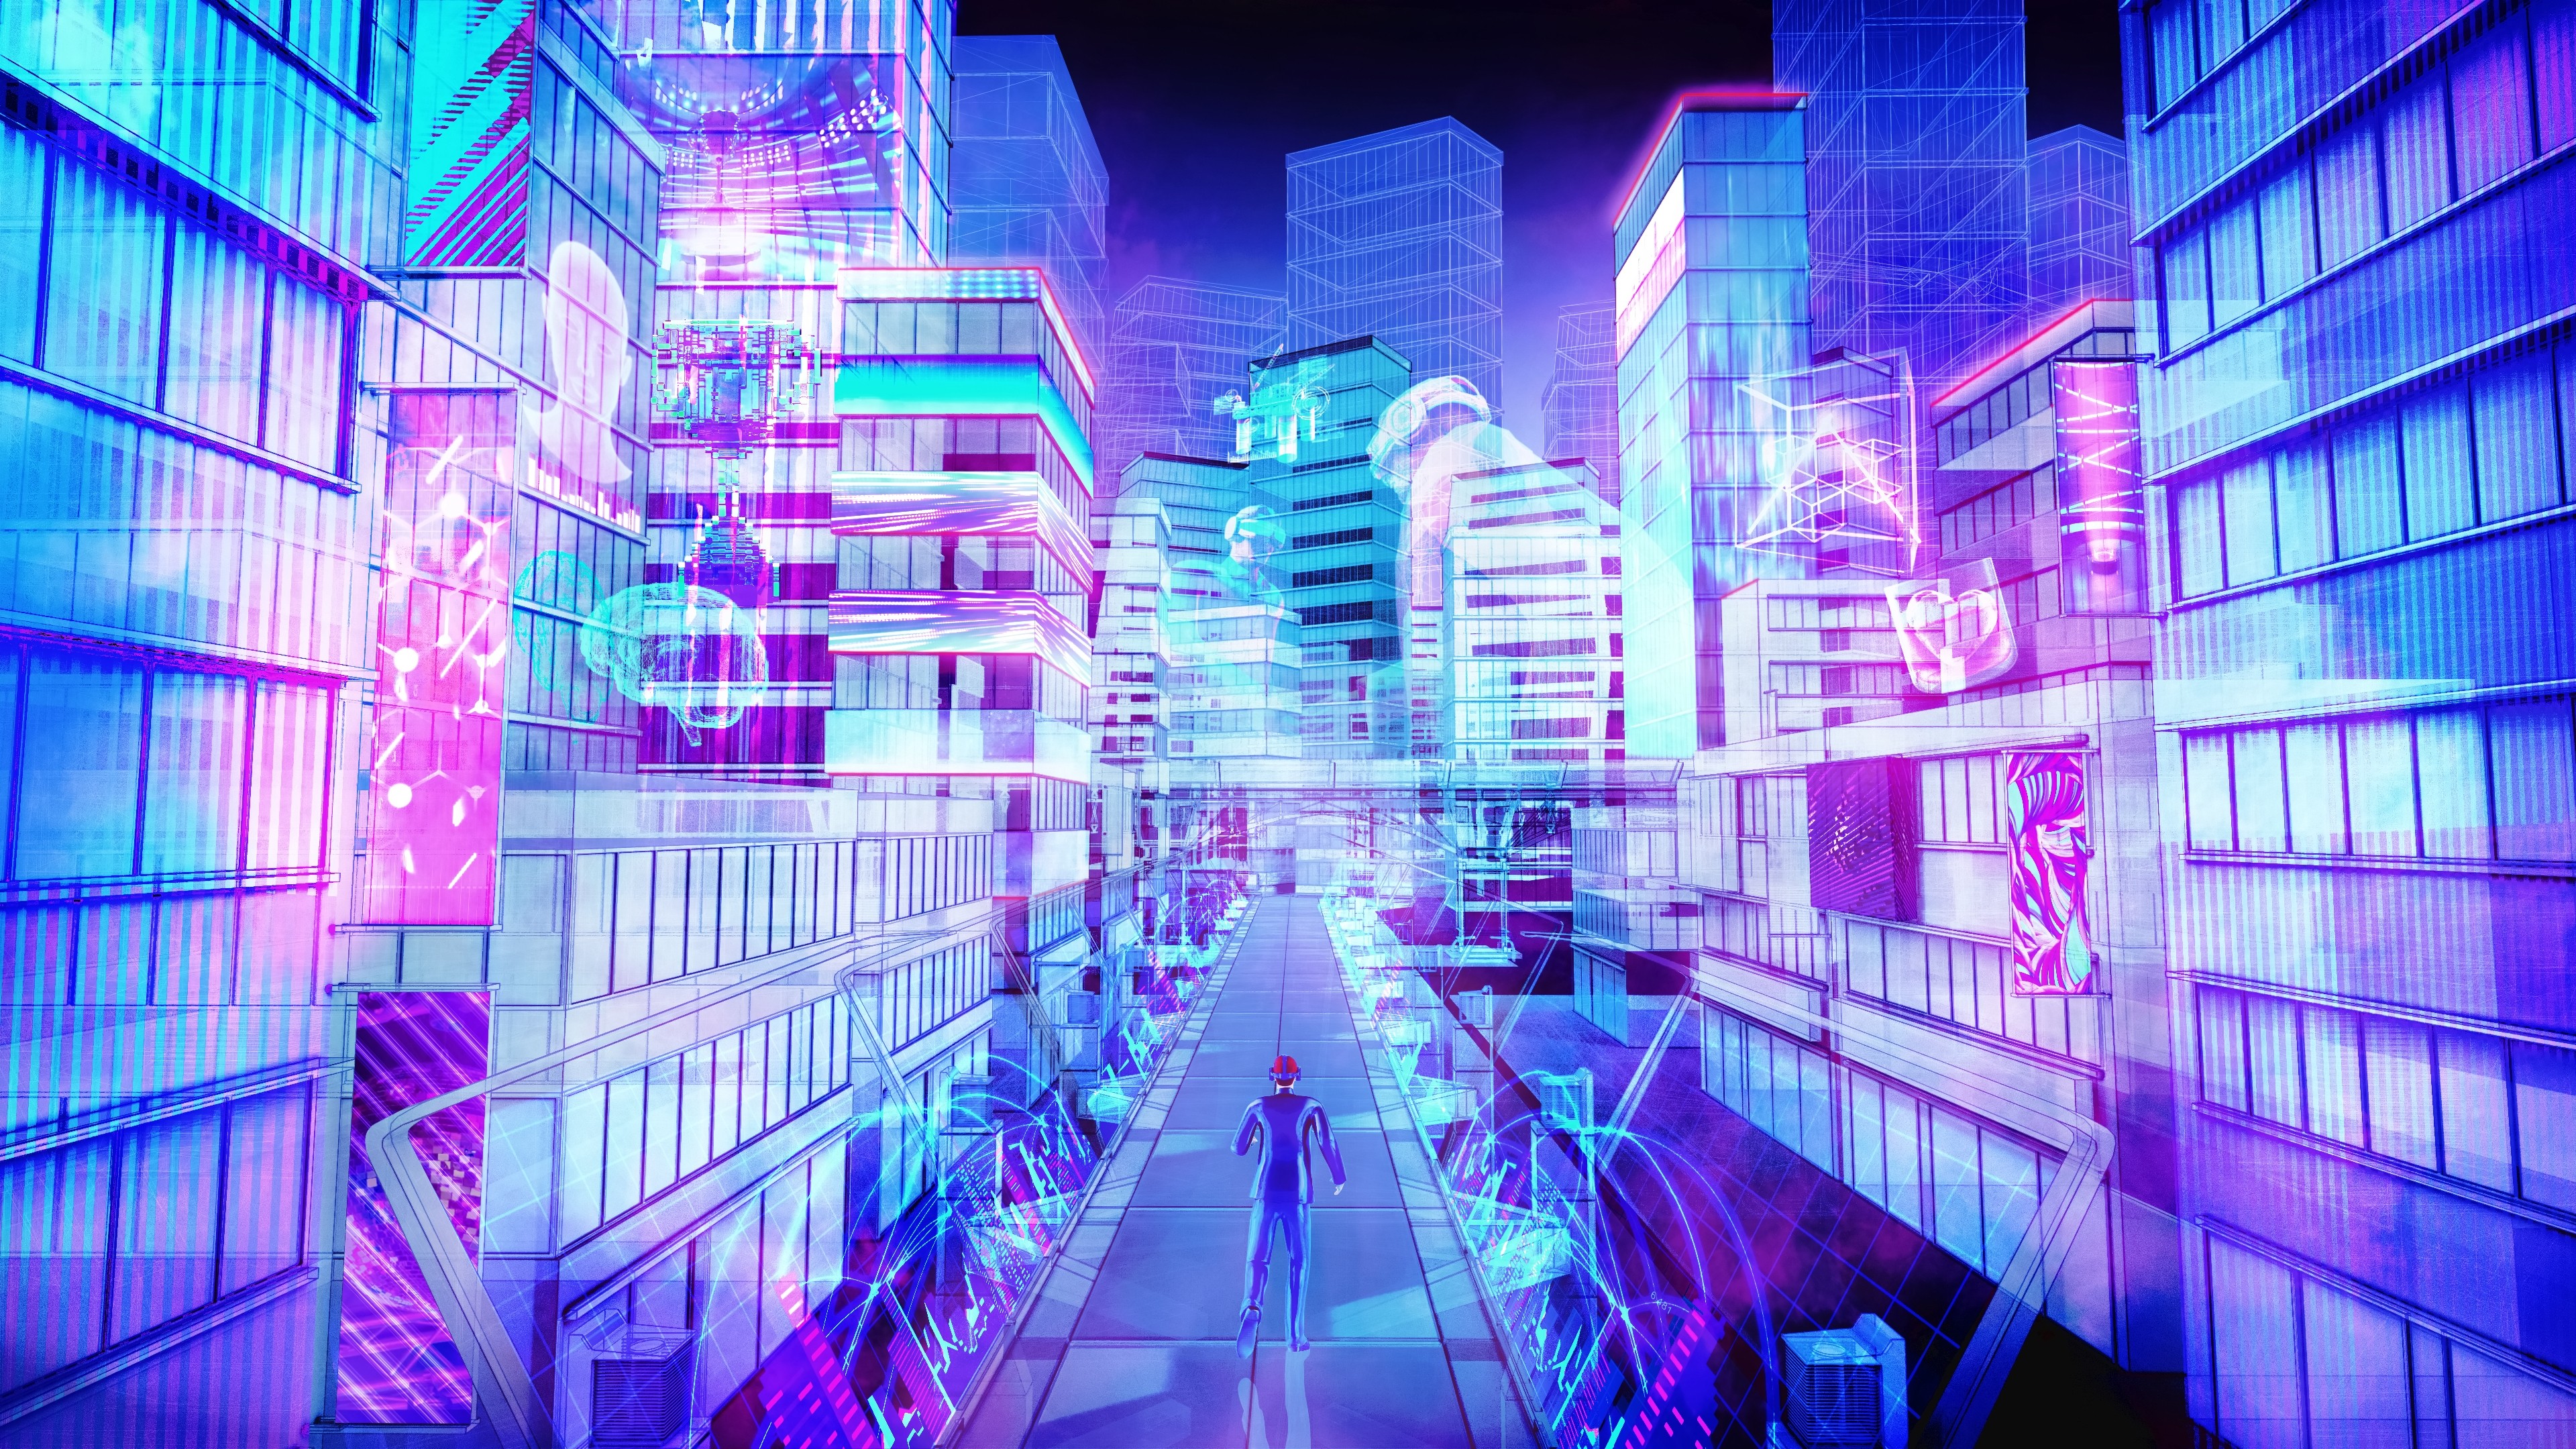 China is promoting the metaverse for industrial use, with a goal of improving manufacturing efficiency. Photo: Shutterstock